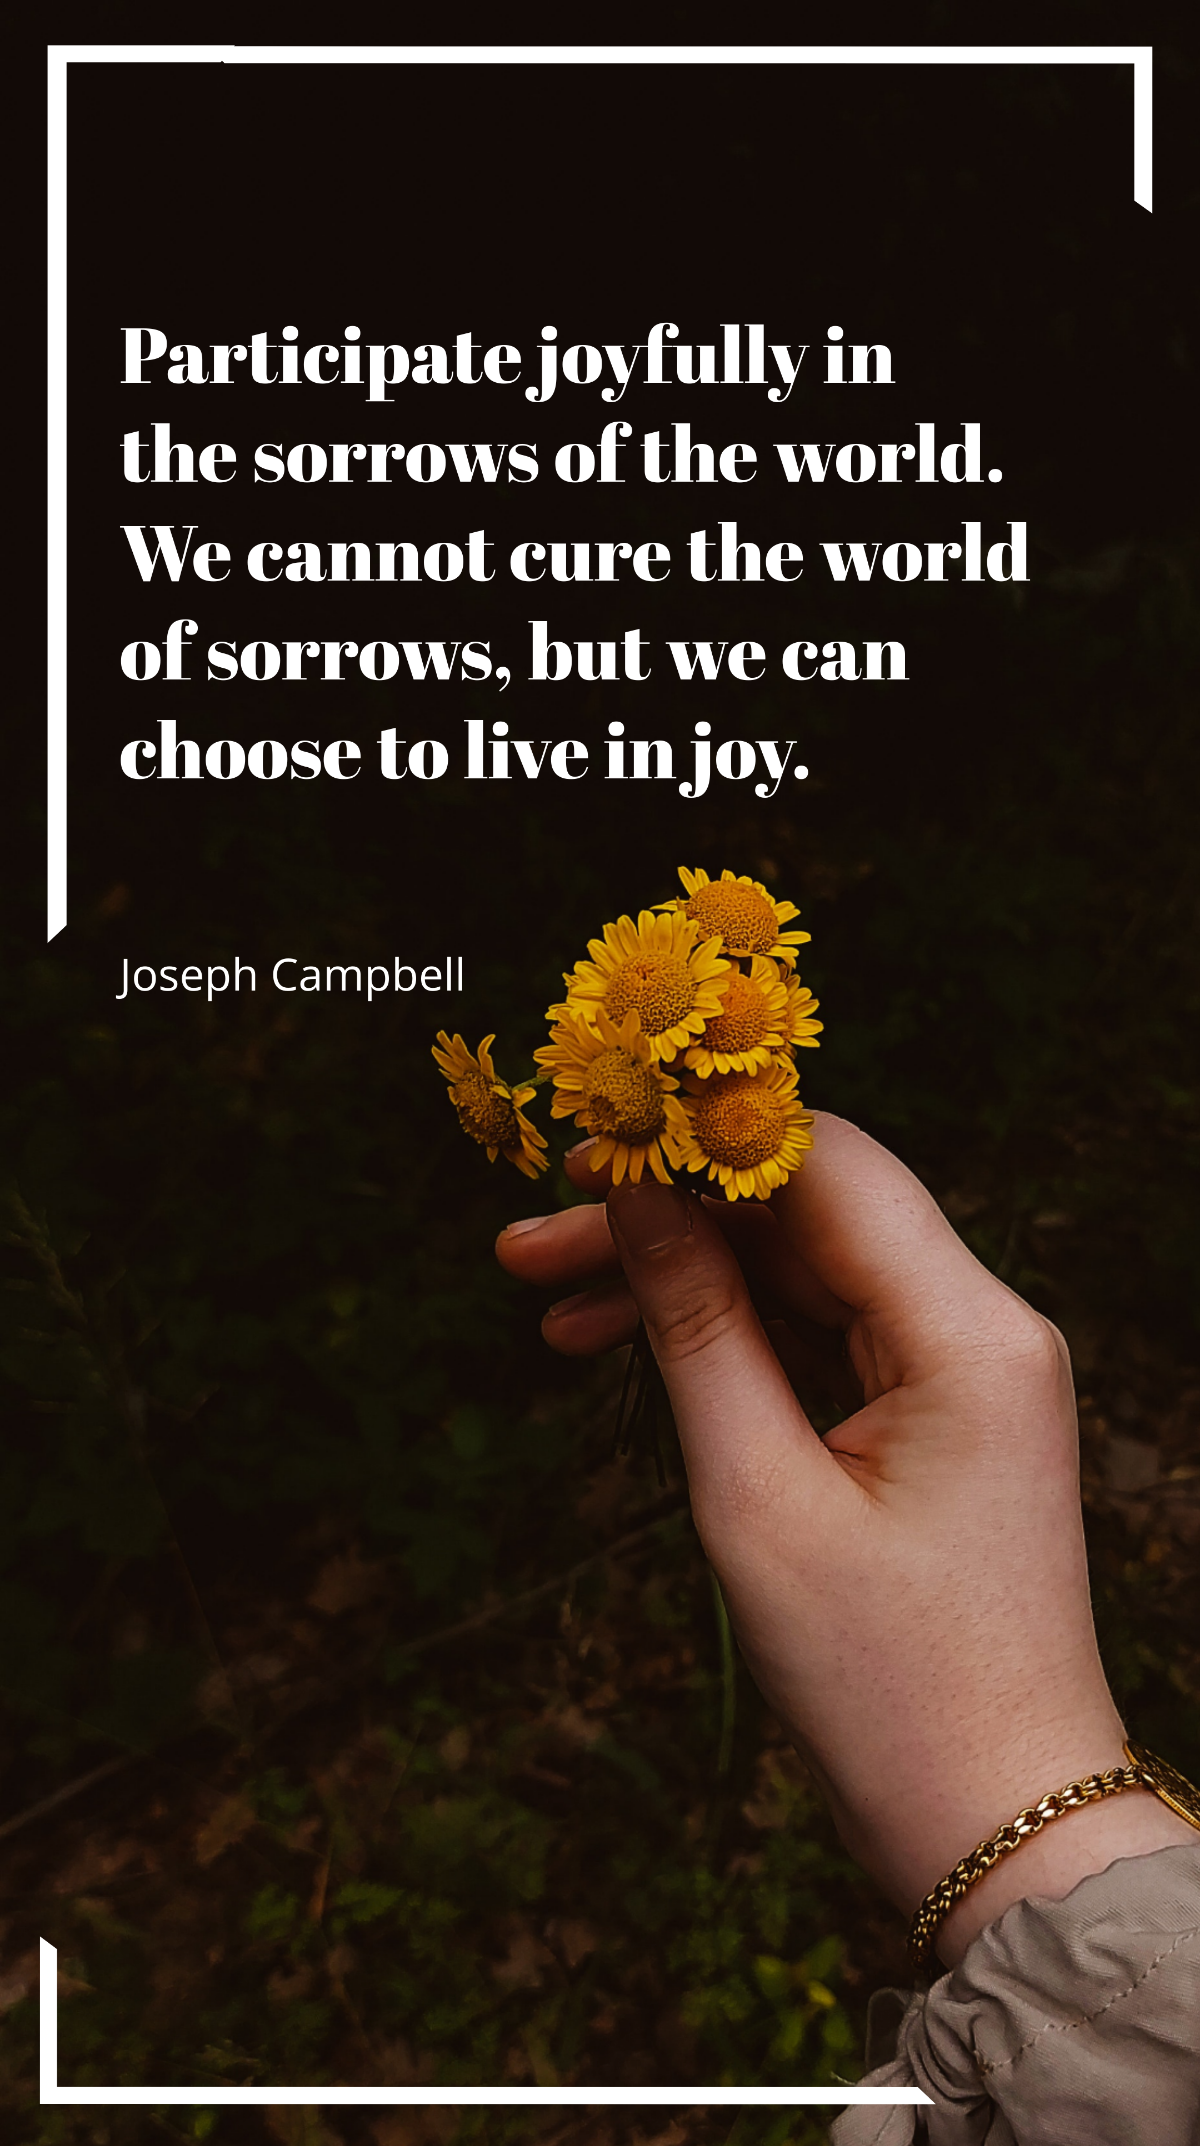 Joseph Campbell - Participate joyfully in the sorrows of the world. We cannot cure the world of sorrows, but we can choose to live in joy. Template